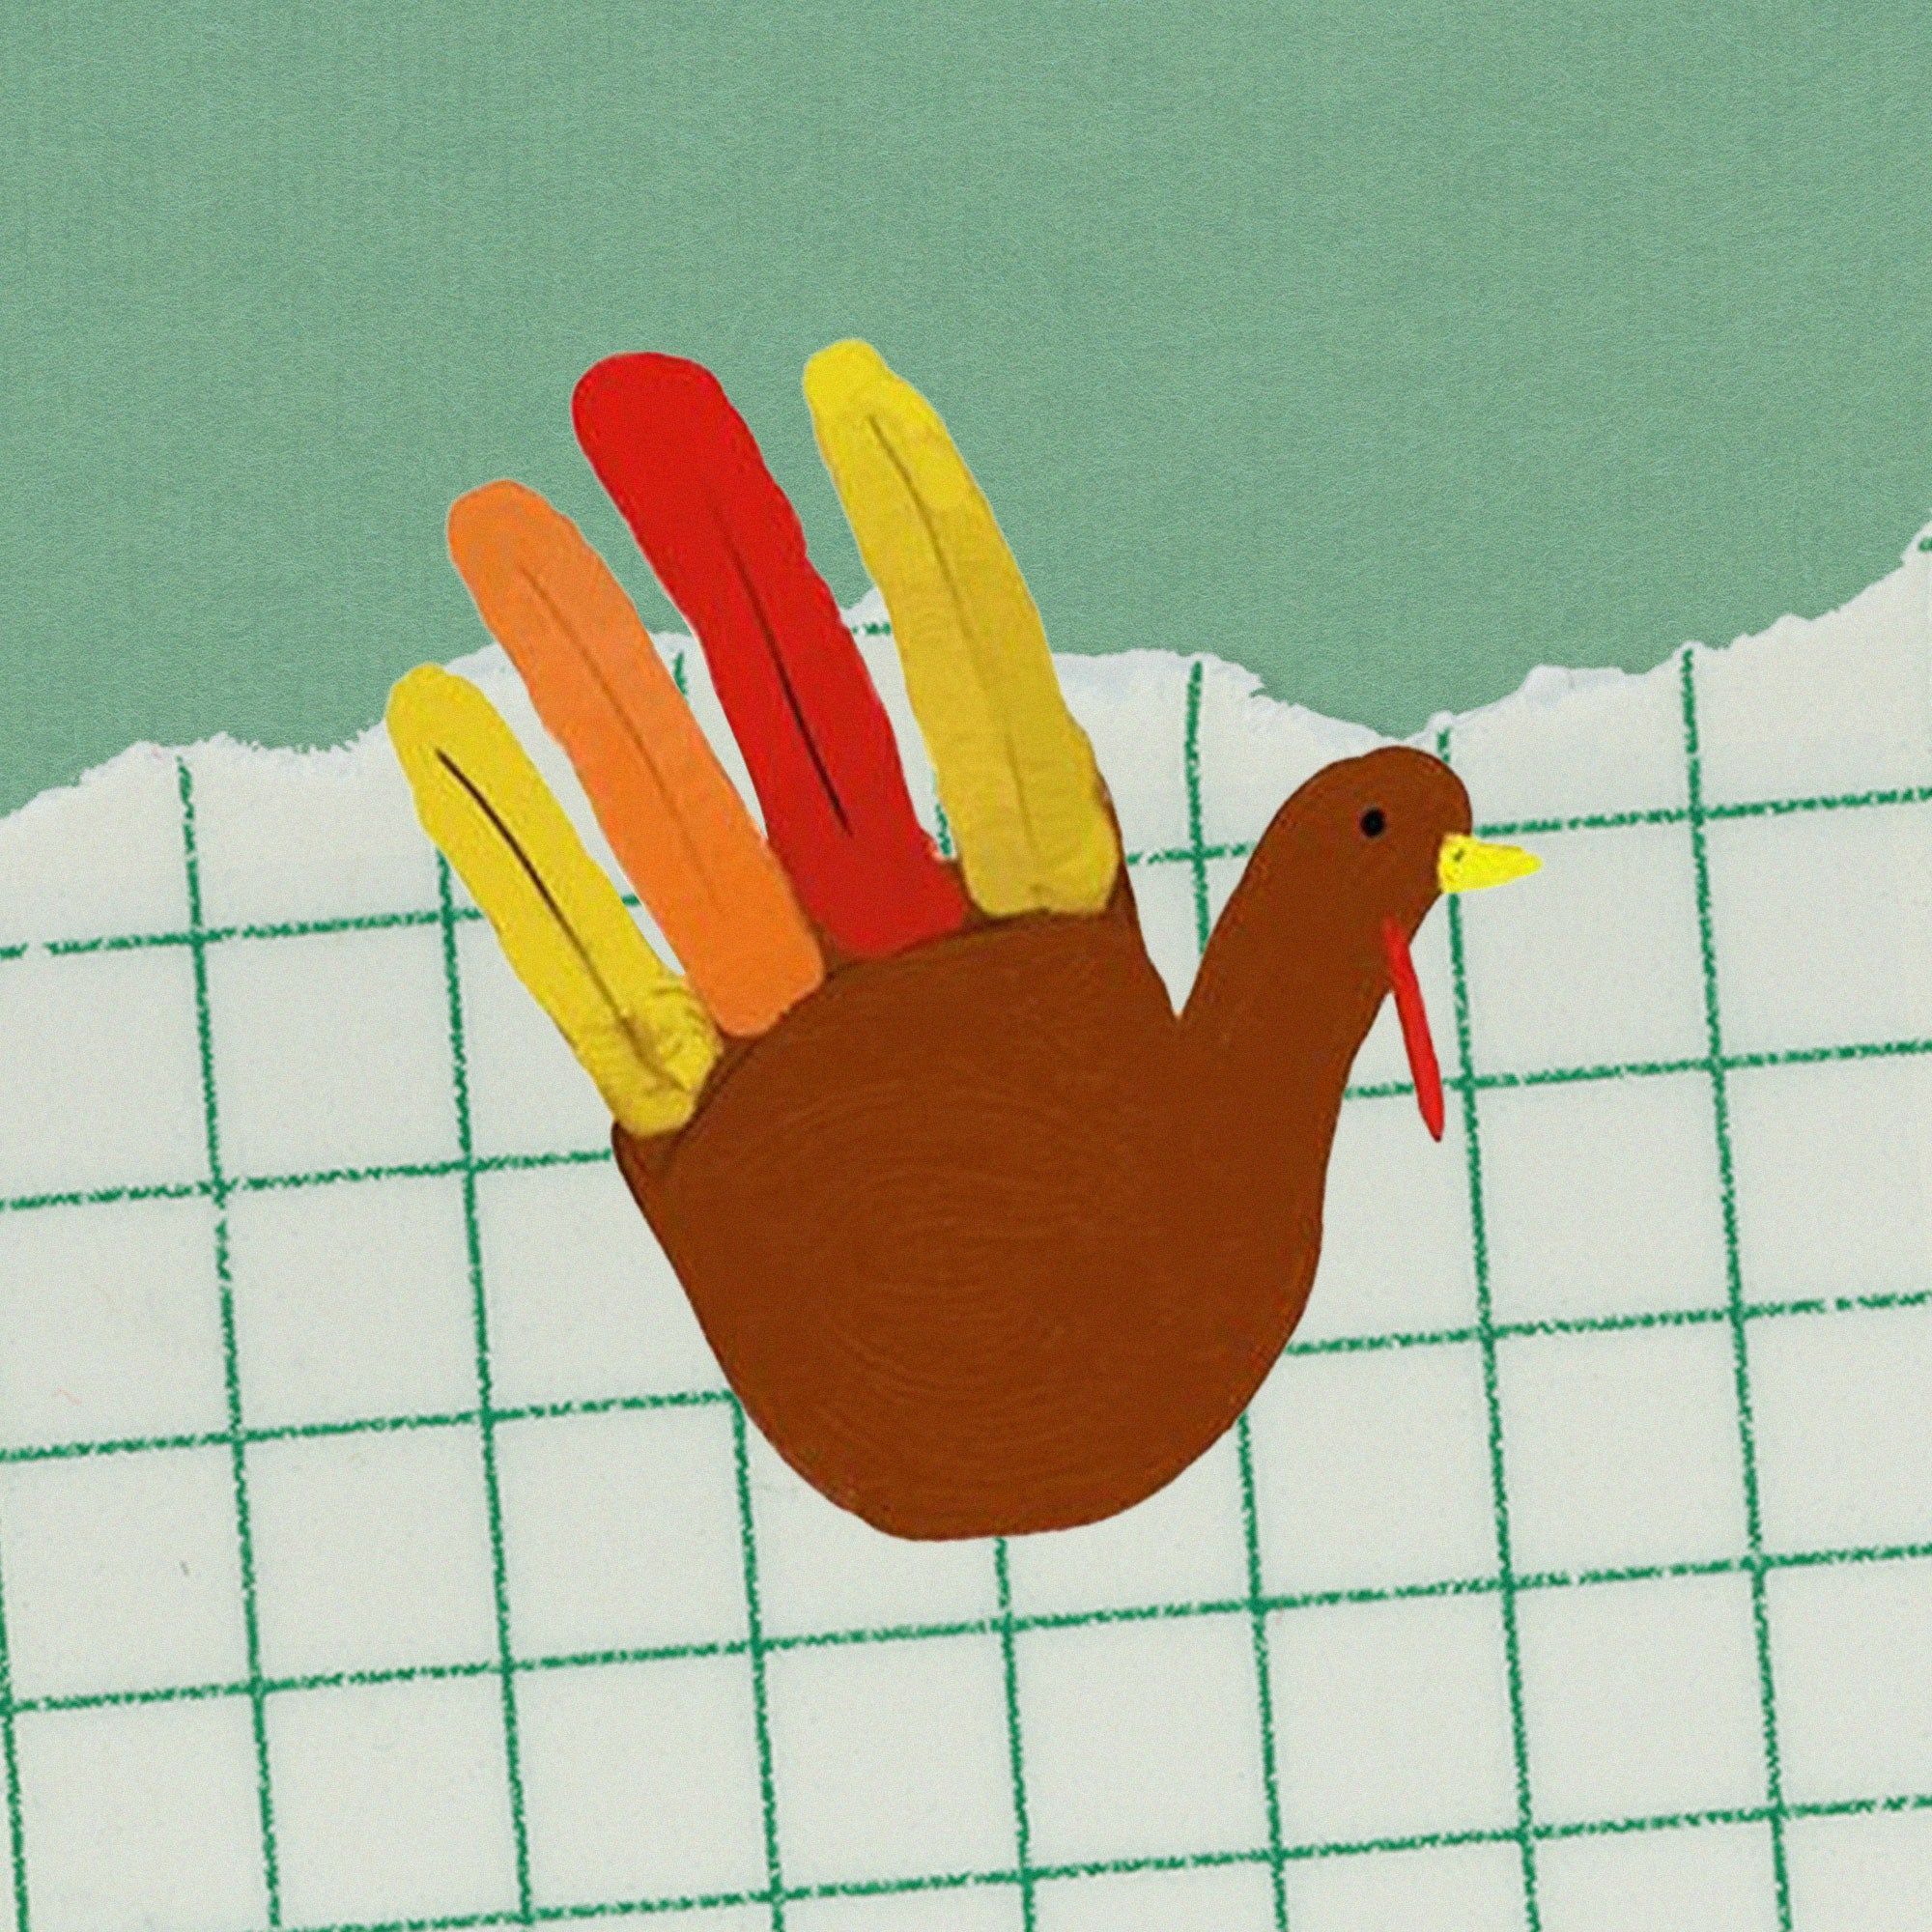 A child's turkey hand craft with a ripped grid paper background